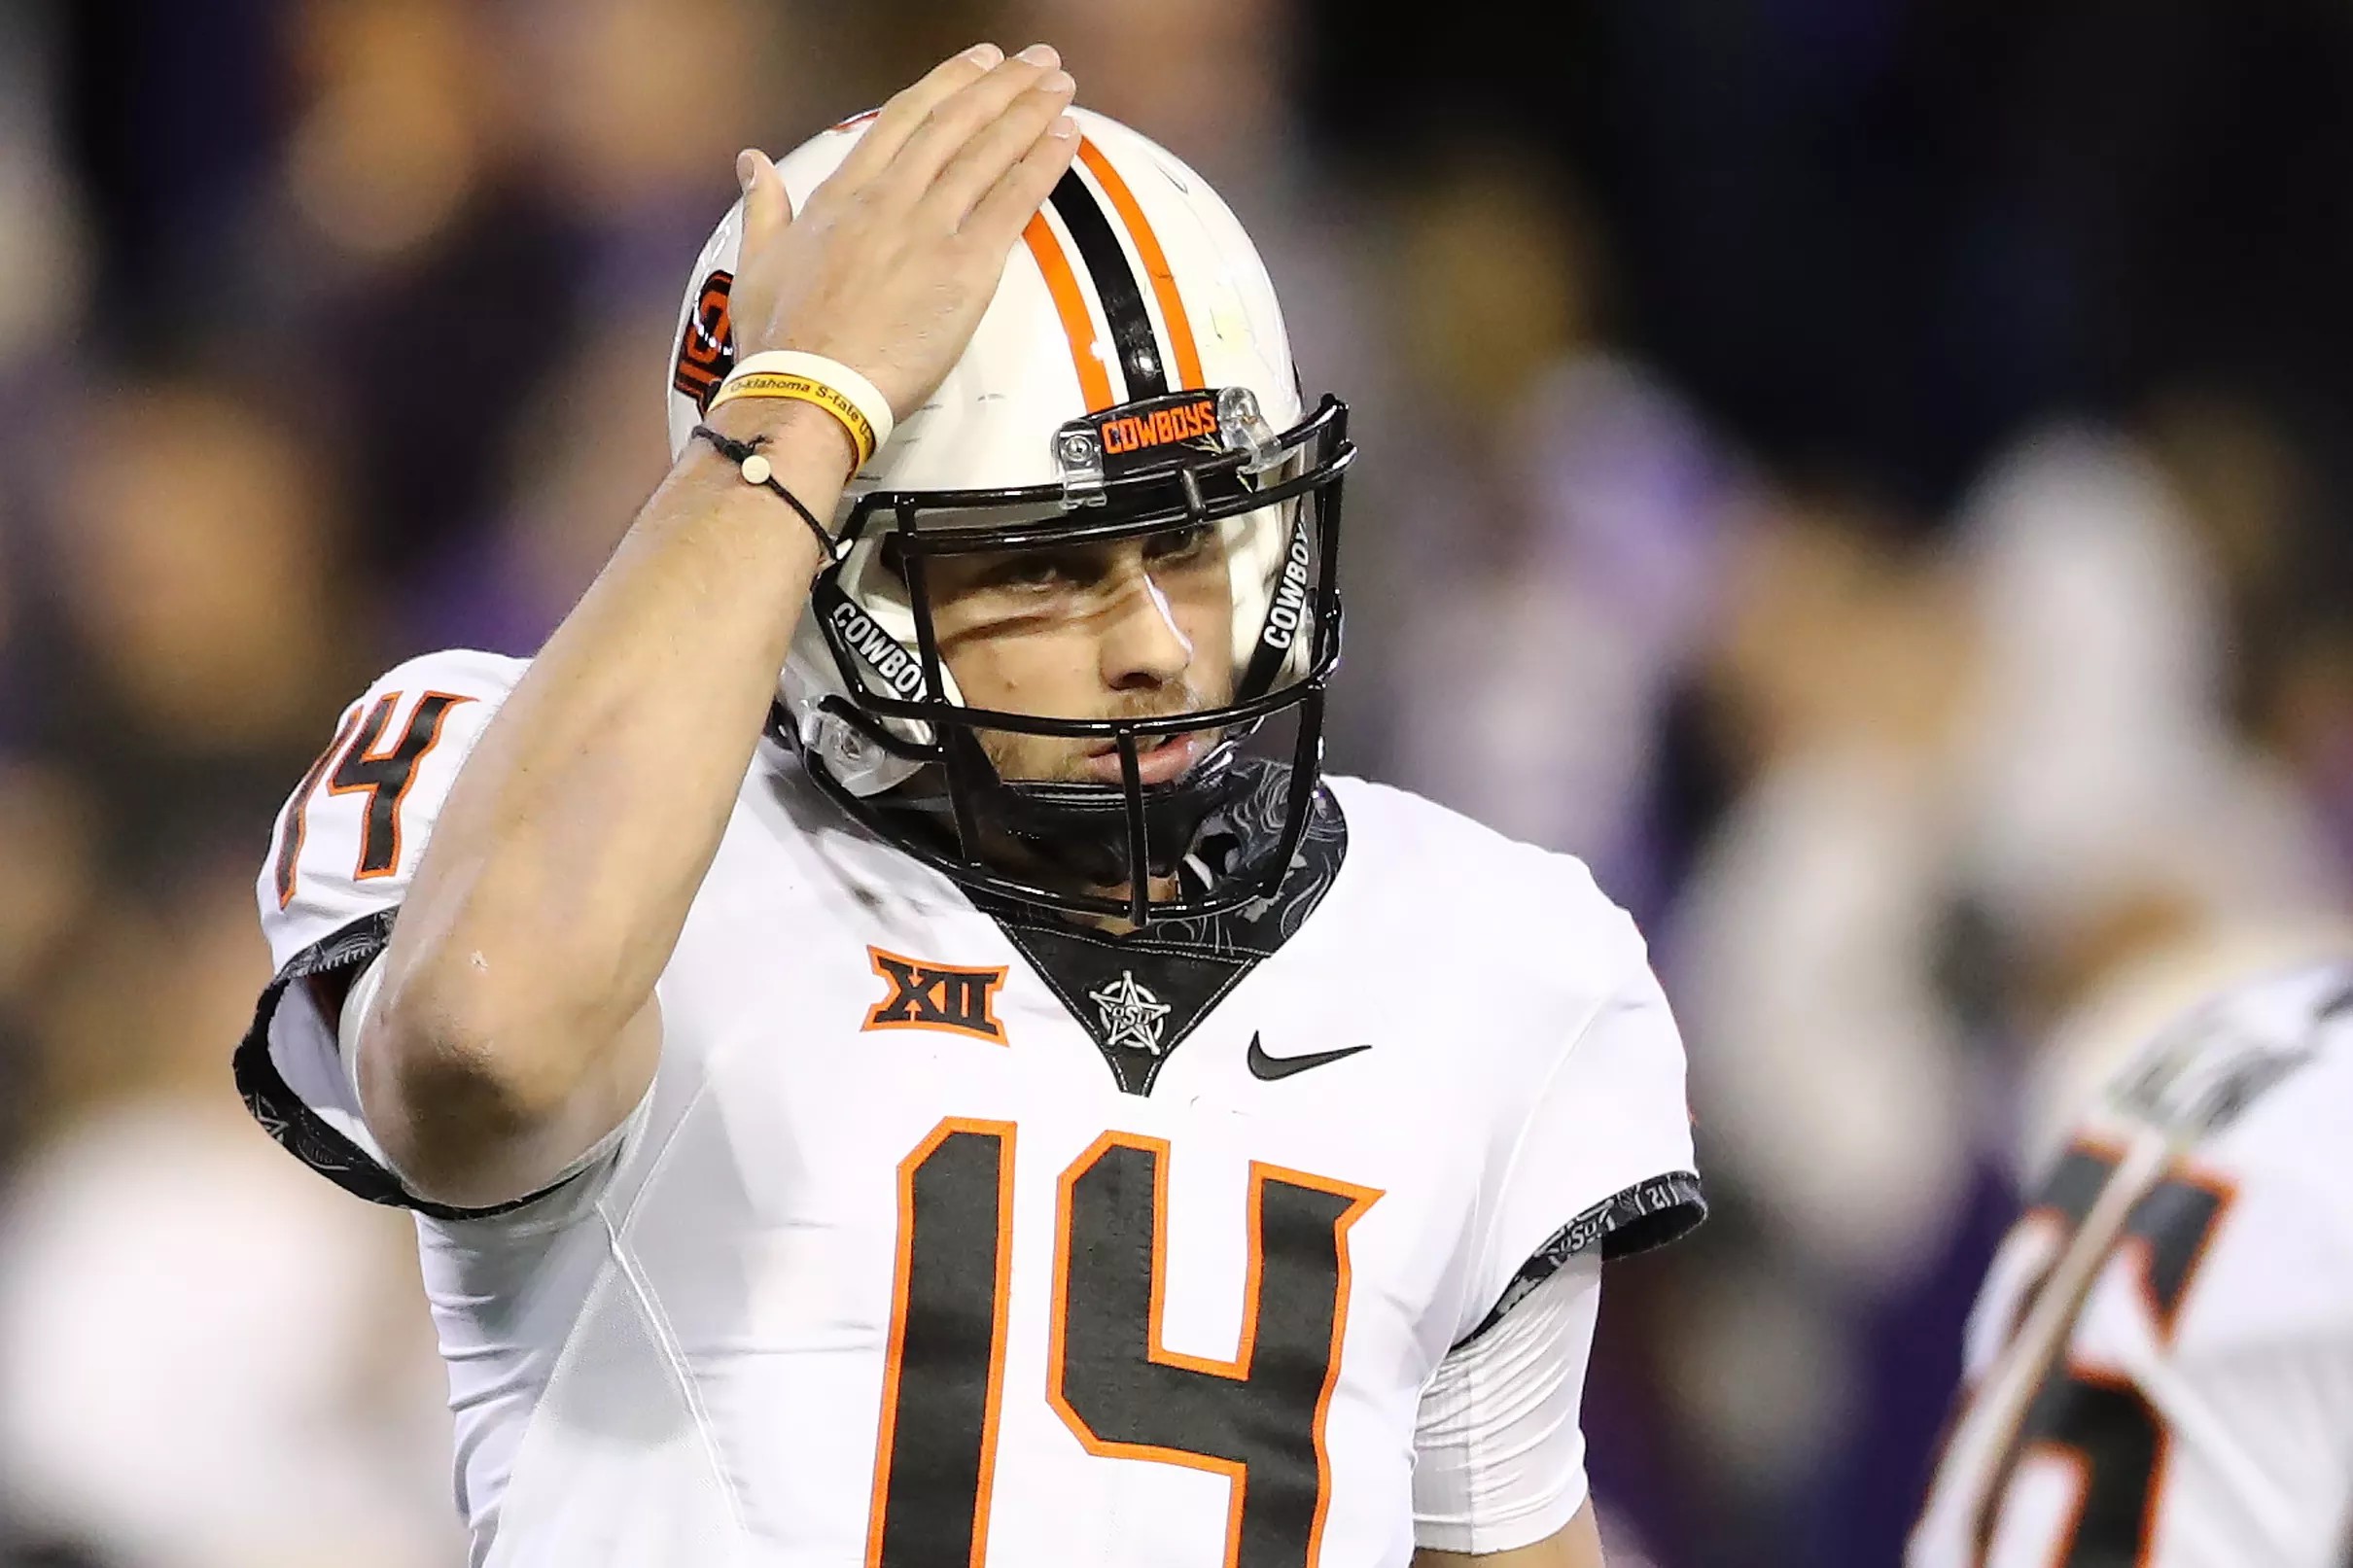 Five Thoughts on Oklahoma State’s Loss to TCU